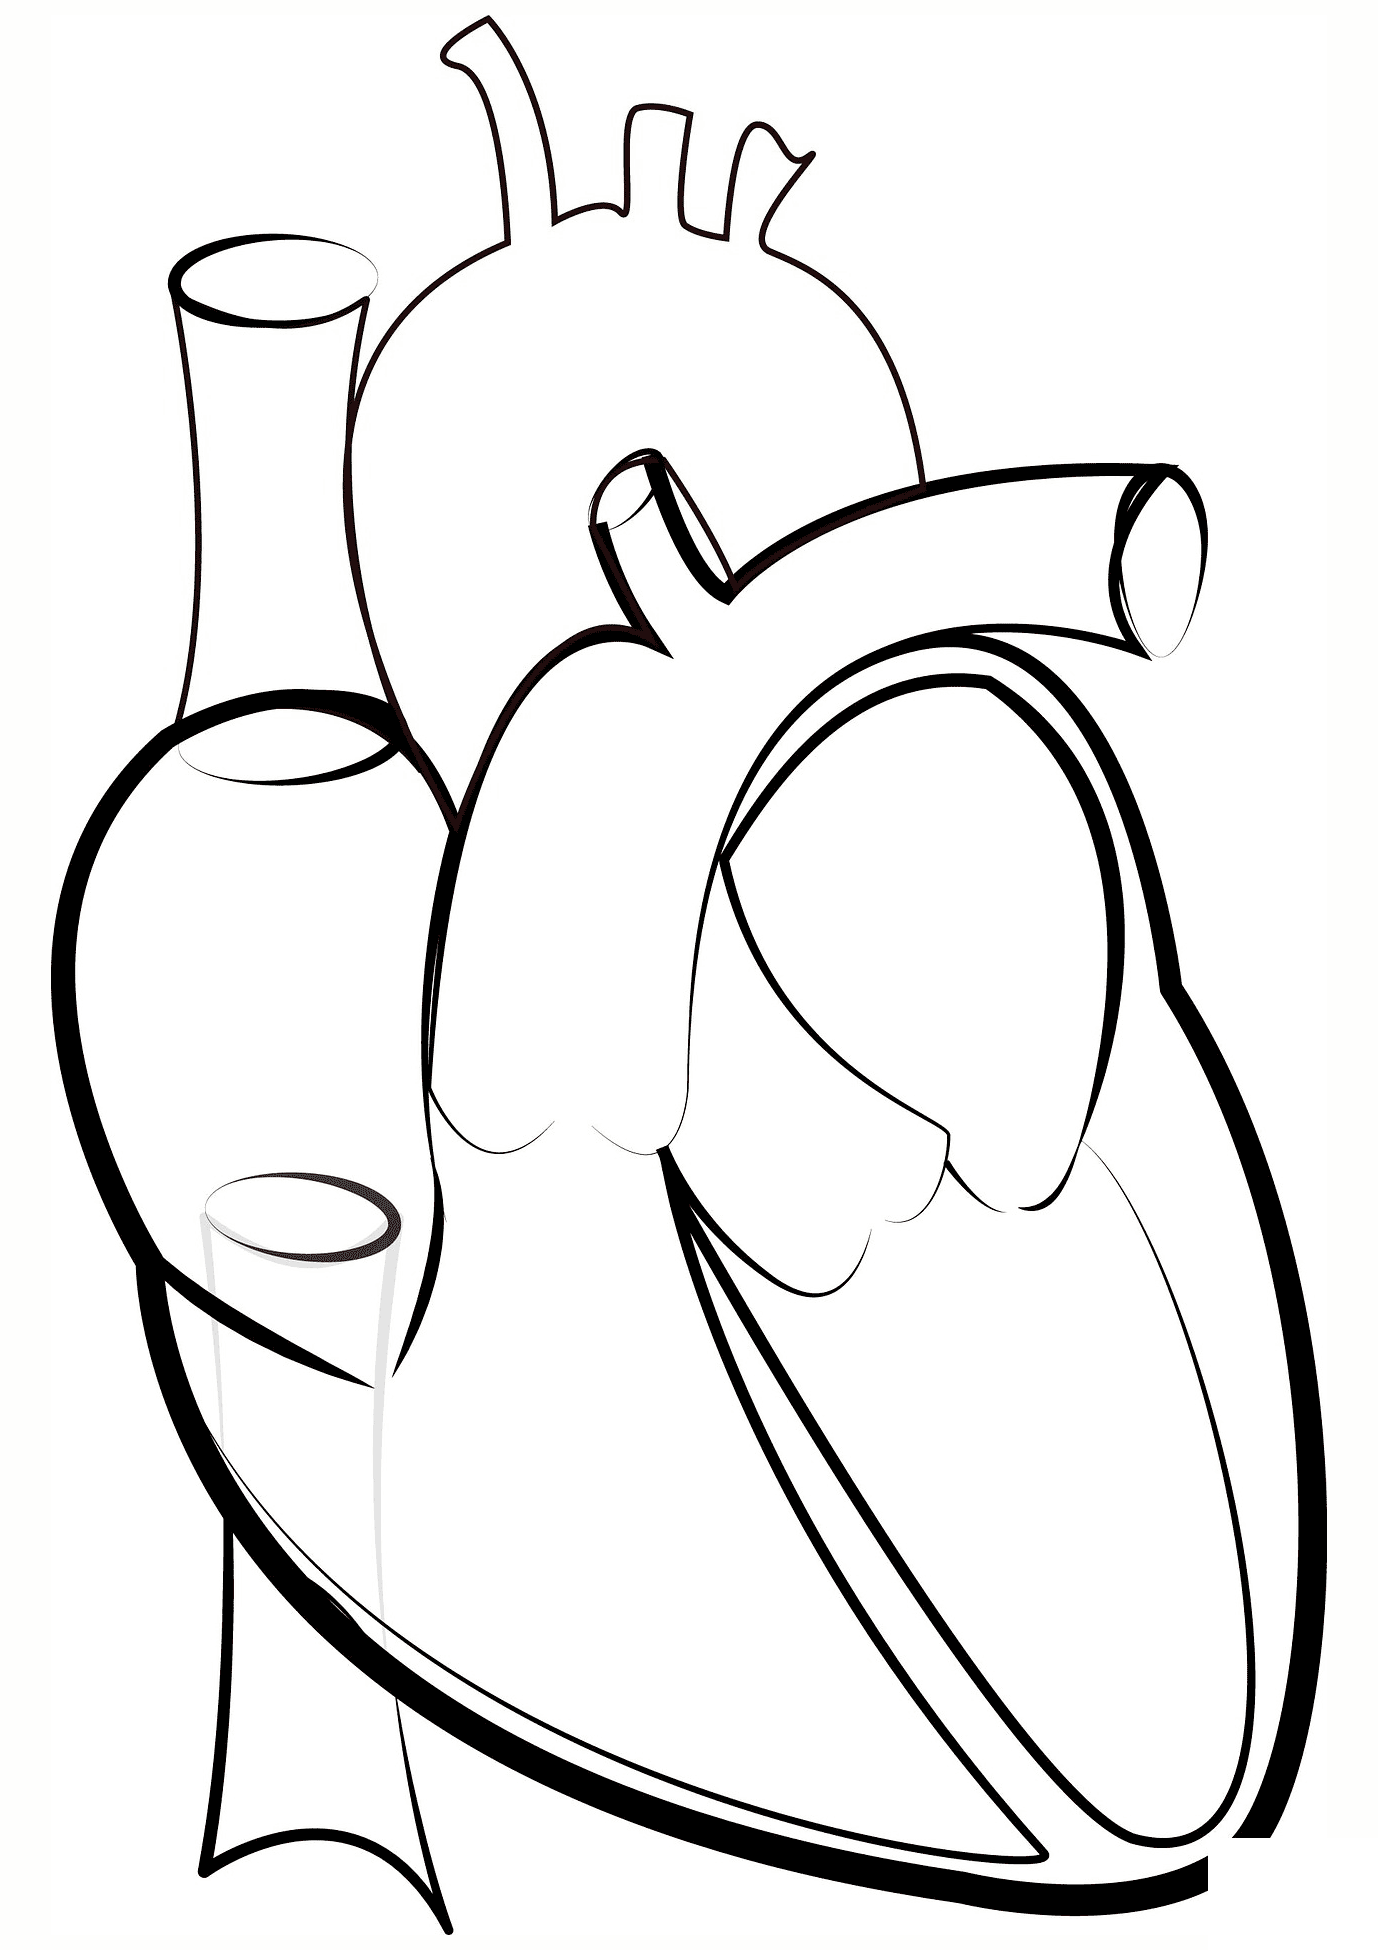 Heart Outline Coloring Page